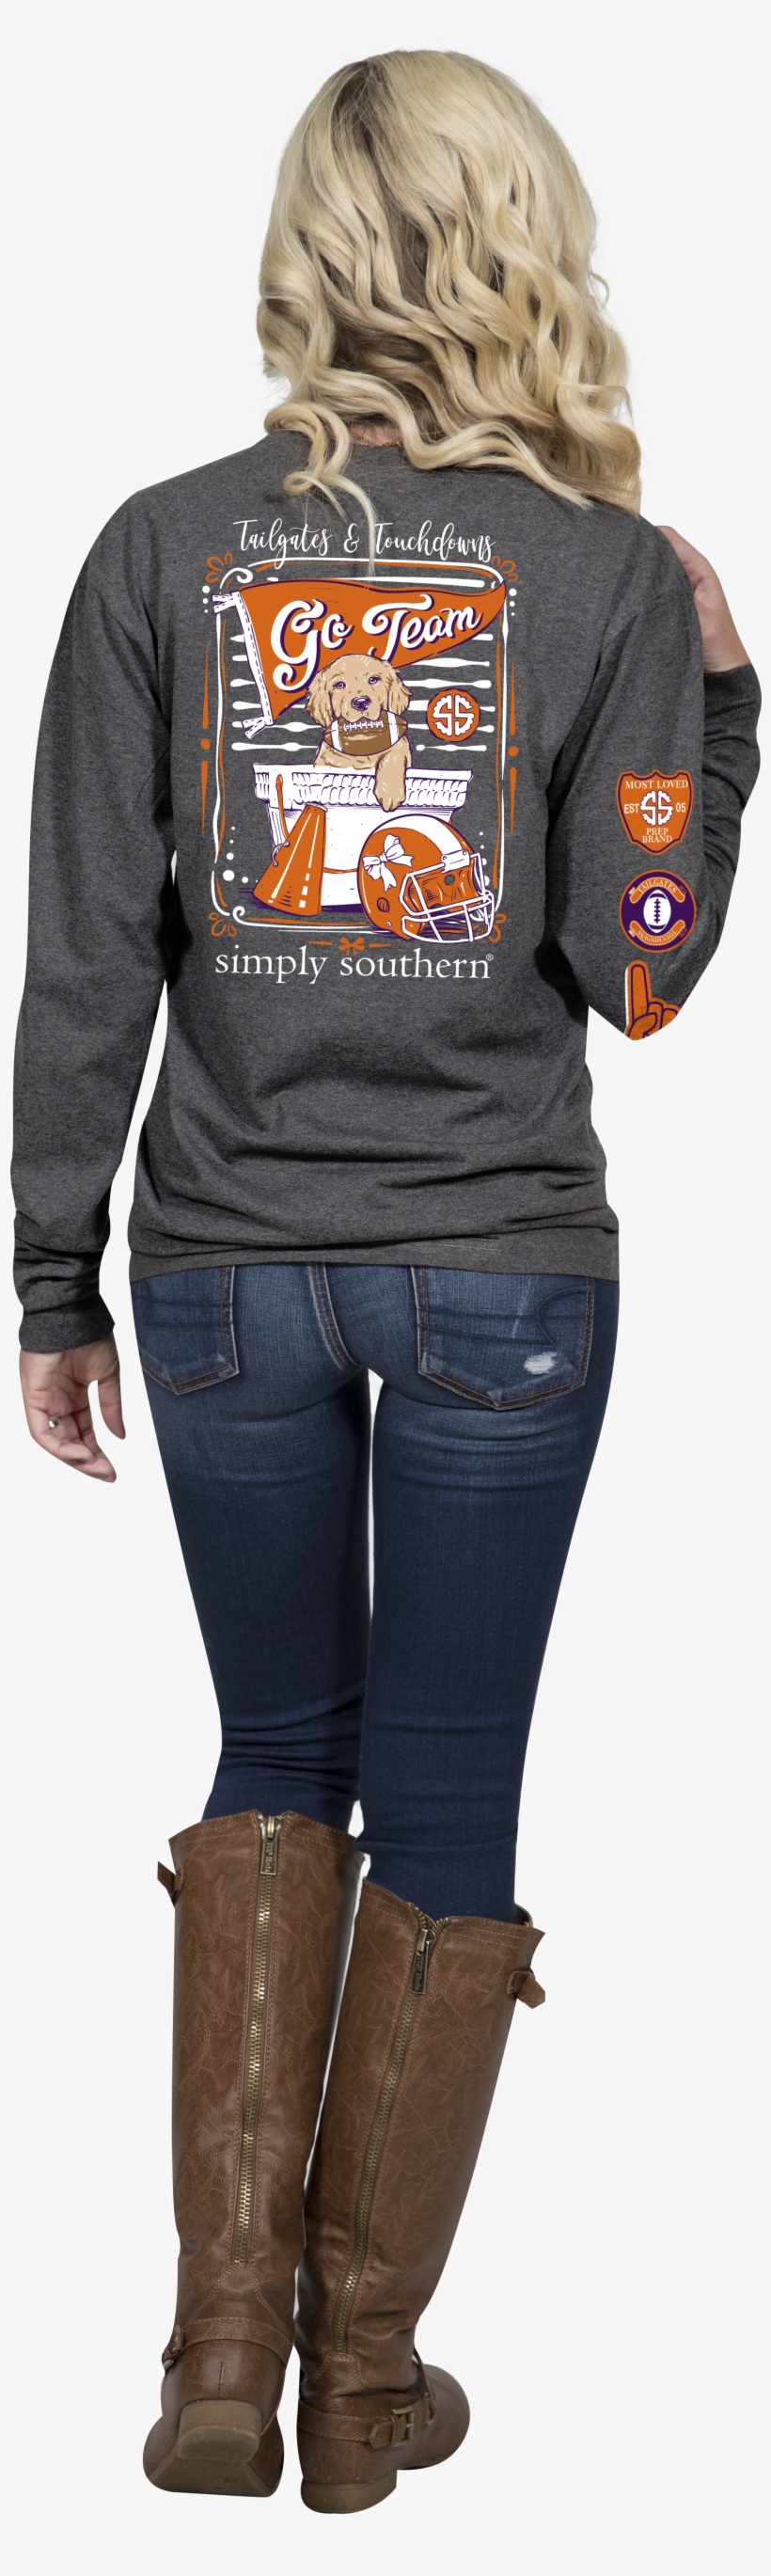 Clemson Tailgates And Touchdowns Long Sleeve T-shirt - Simply Southern Hohoho, transparent png #3807598